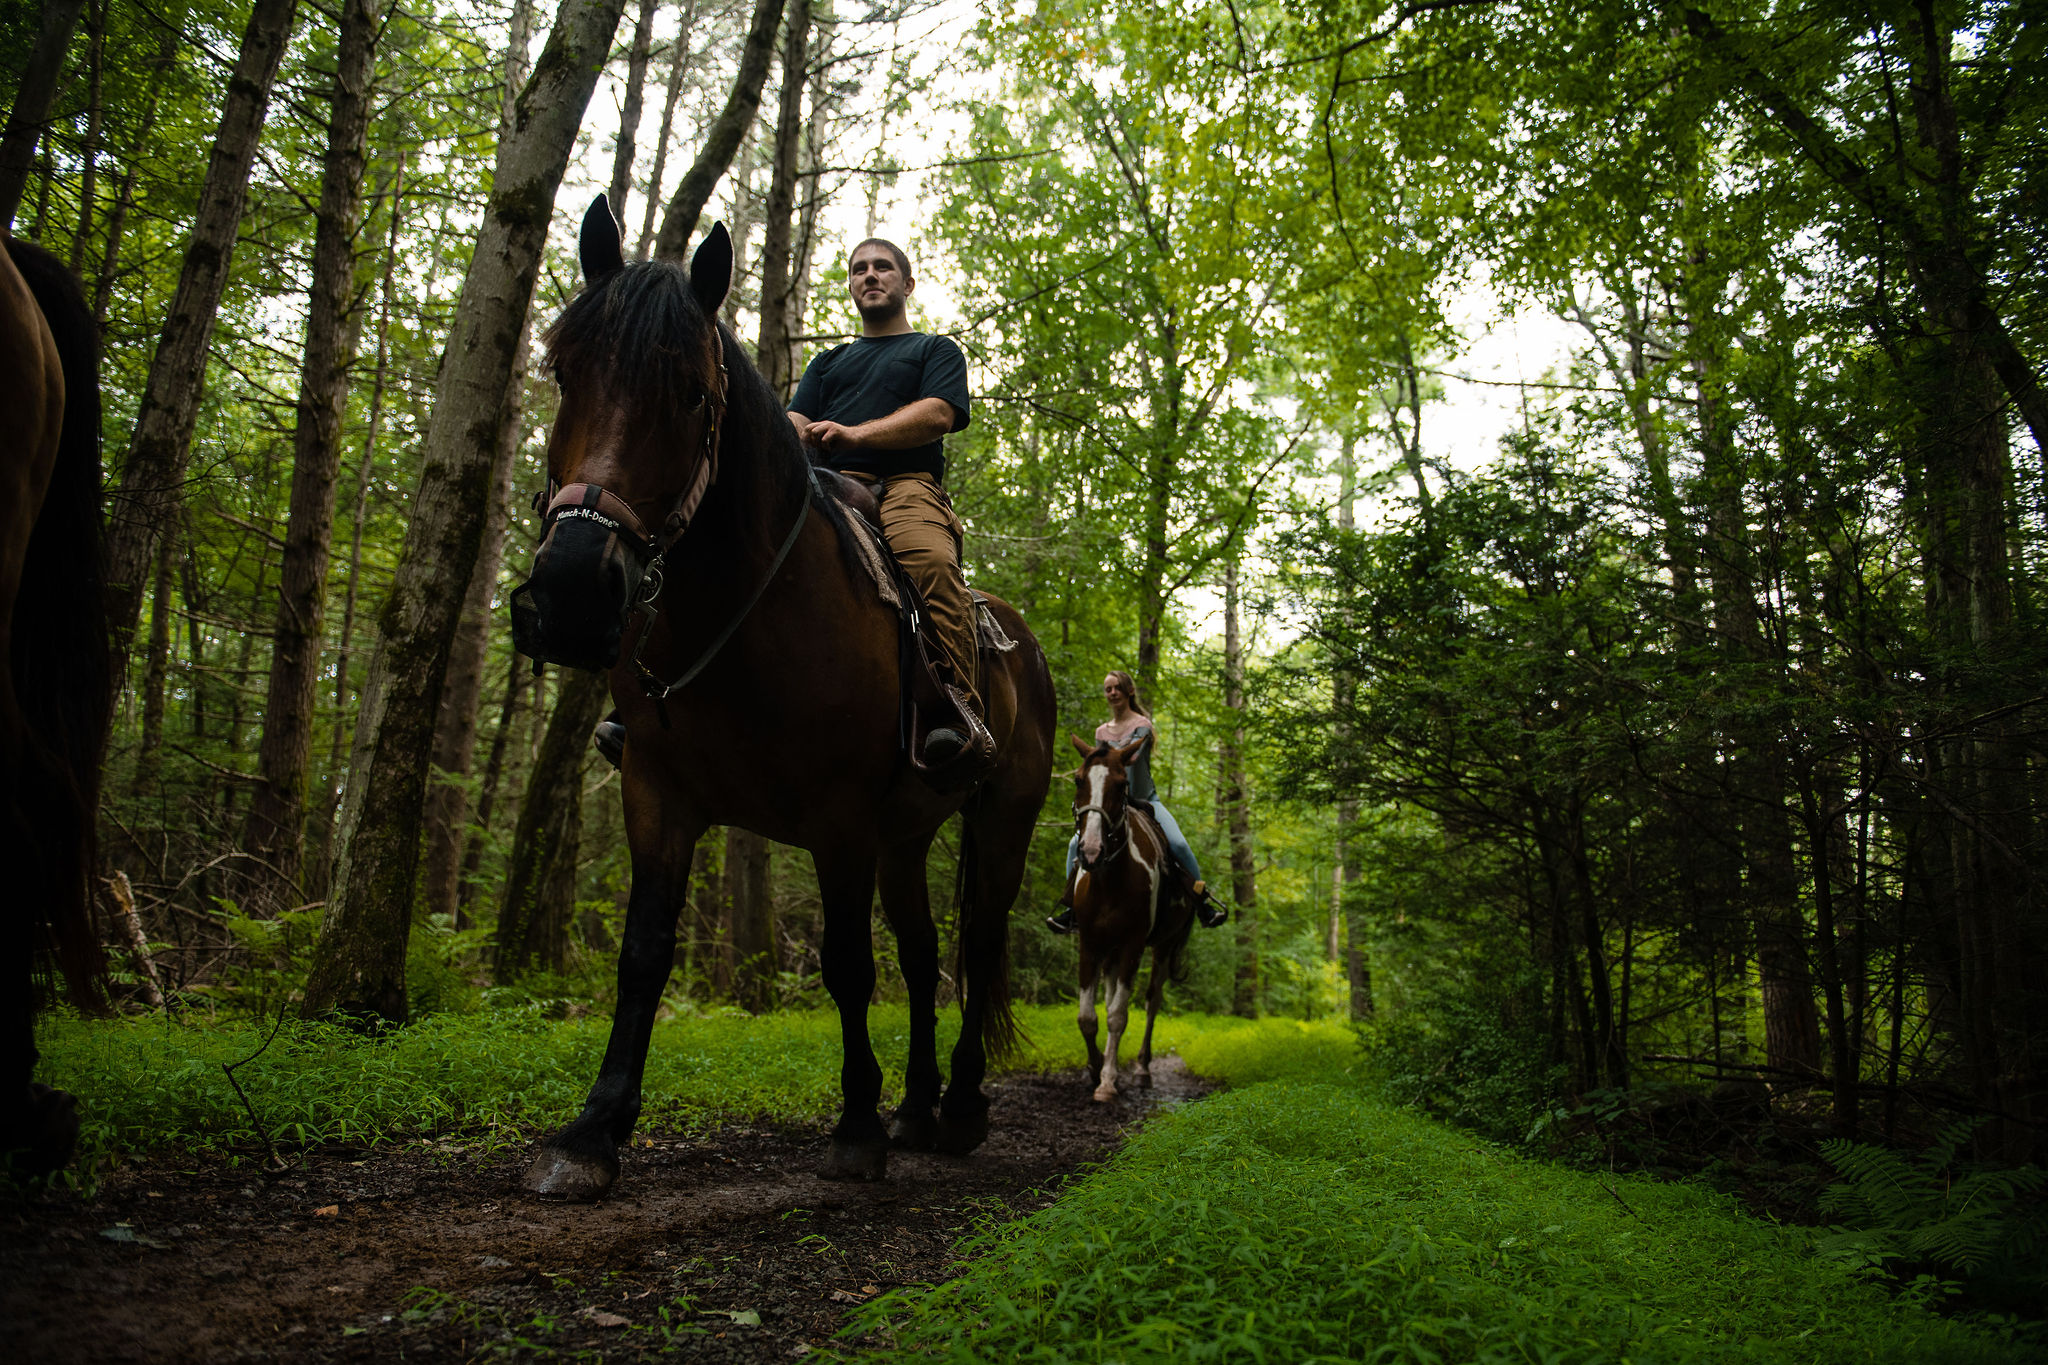 Man and Woman on Horseback Trail Ride in Poconos Mountains